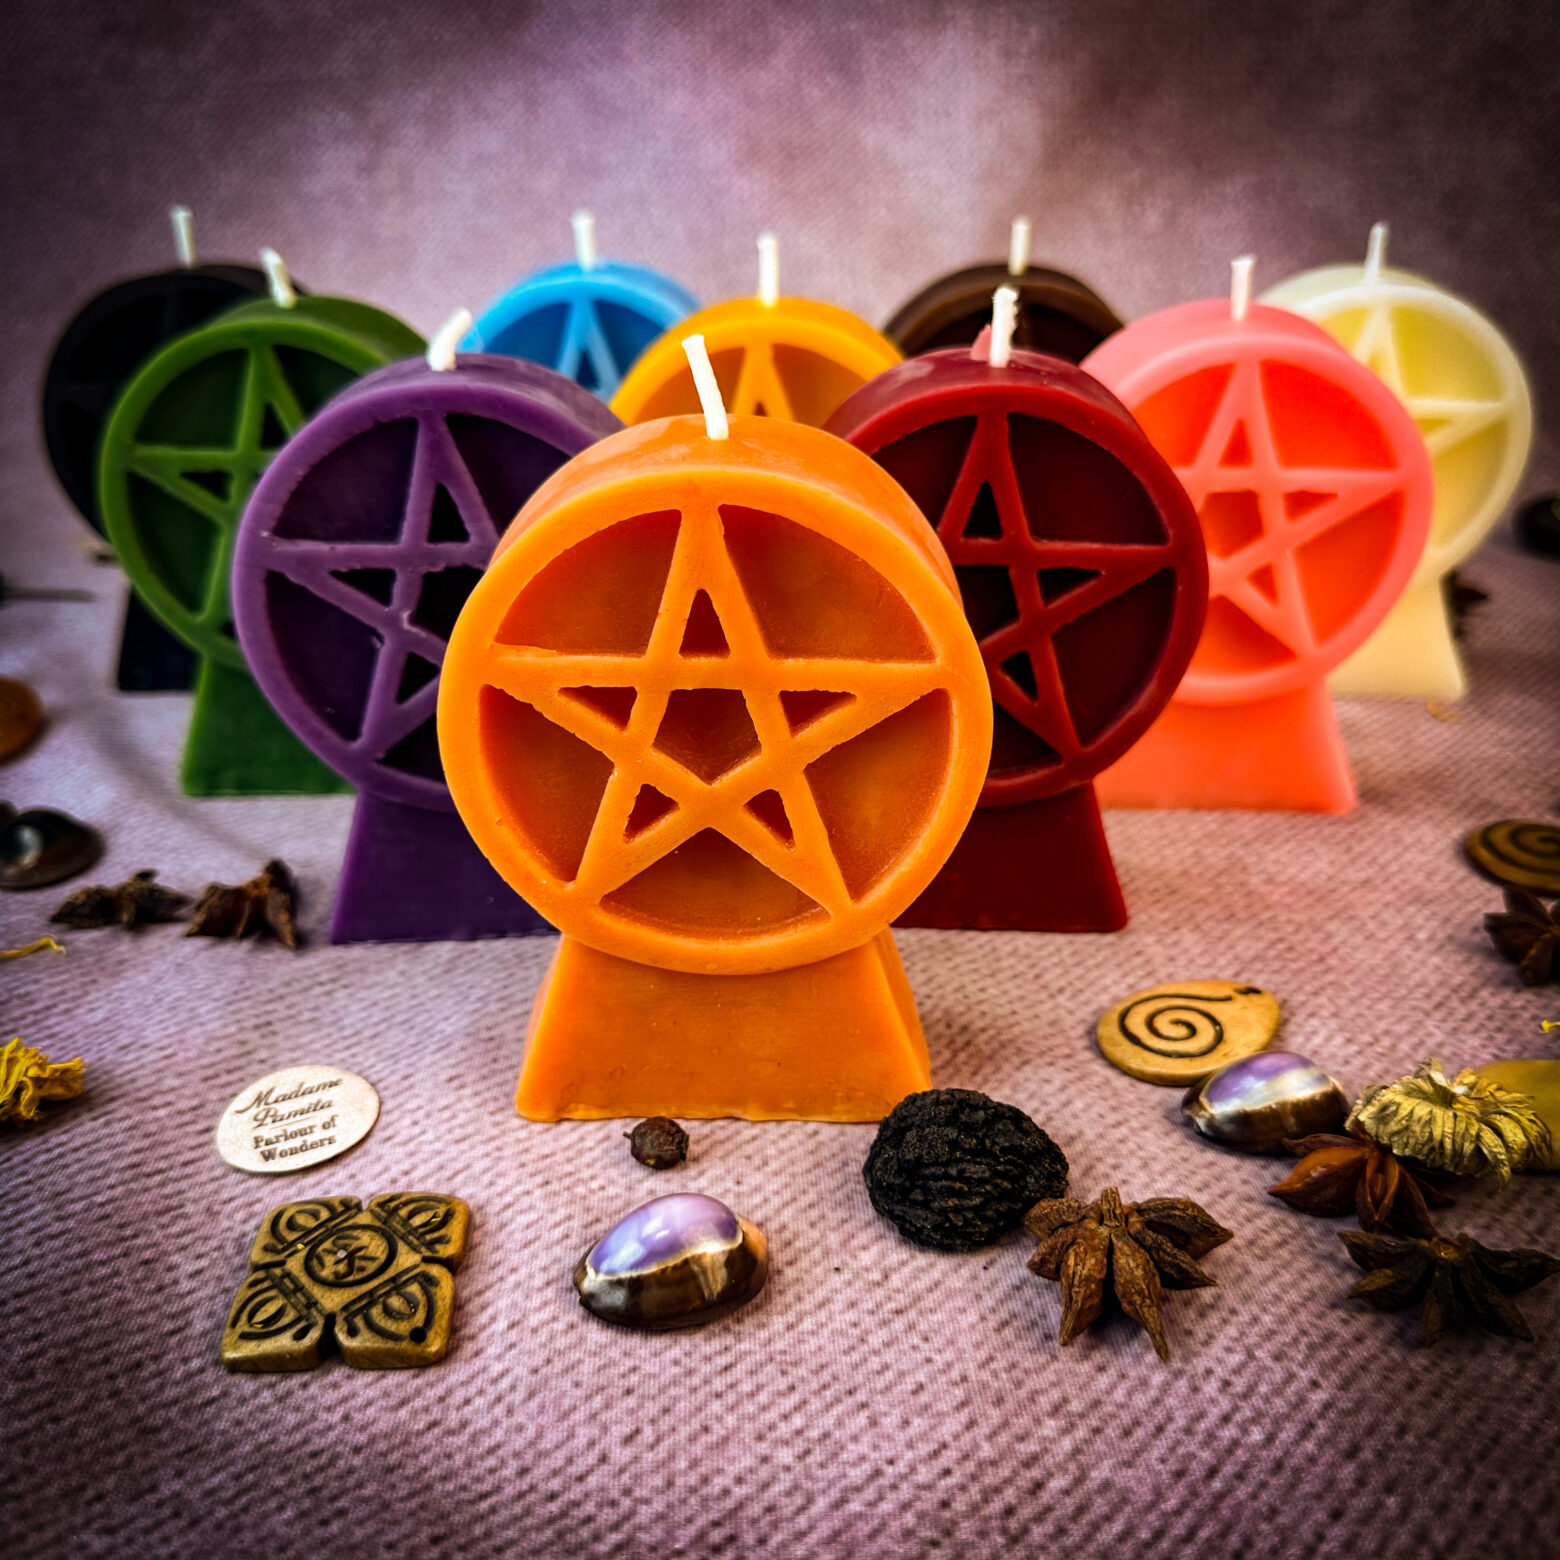 Beeswax Pentagram of Protection Spell Candle